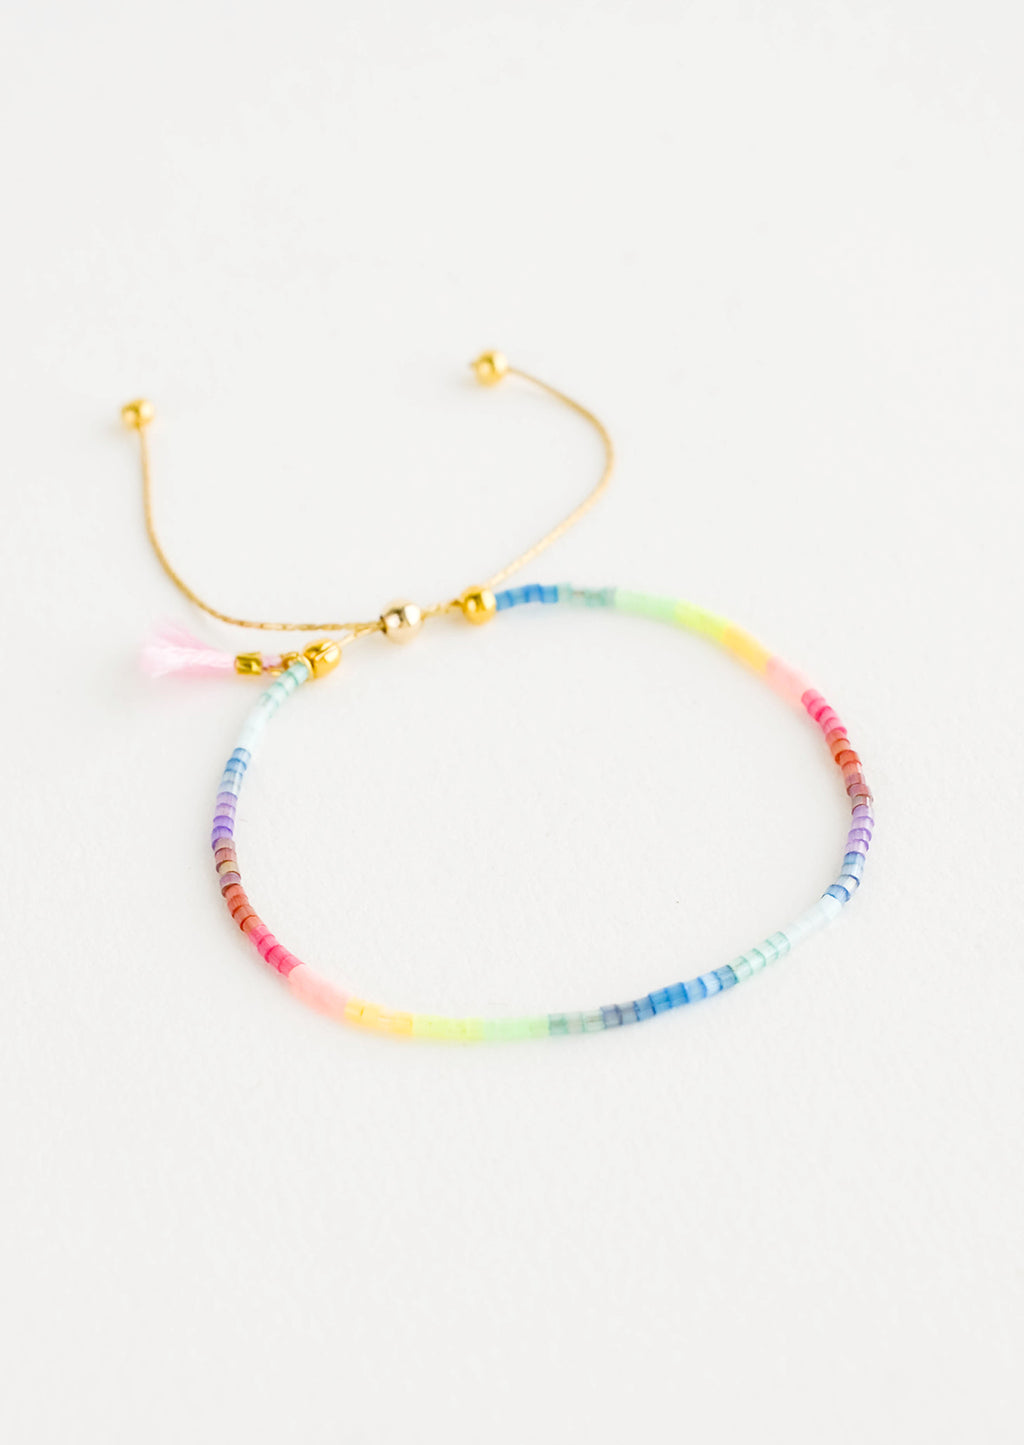 Rainbow Multi: Delicate bracelet of rainbow colored glass beads on a thin gold chain.